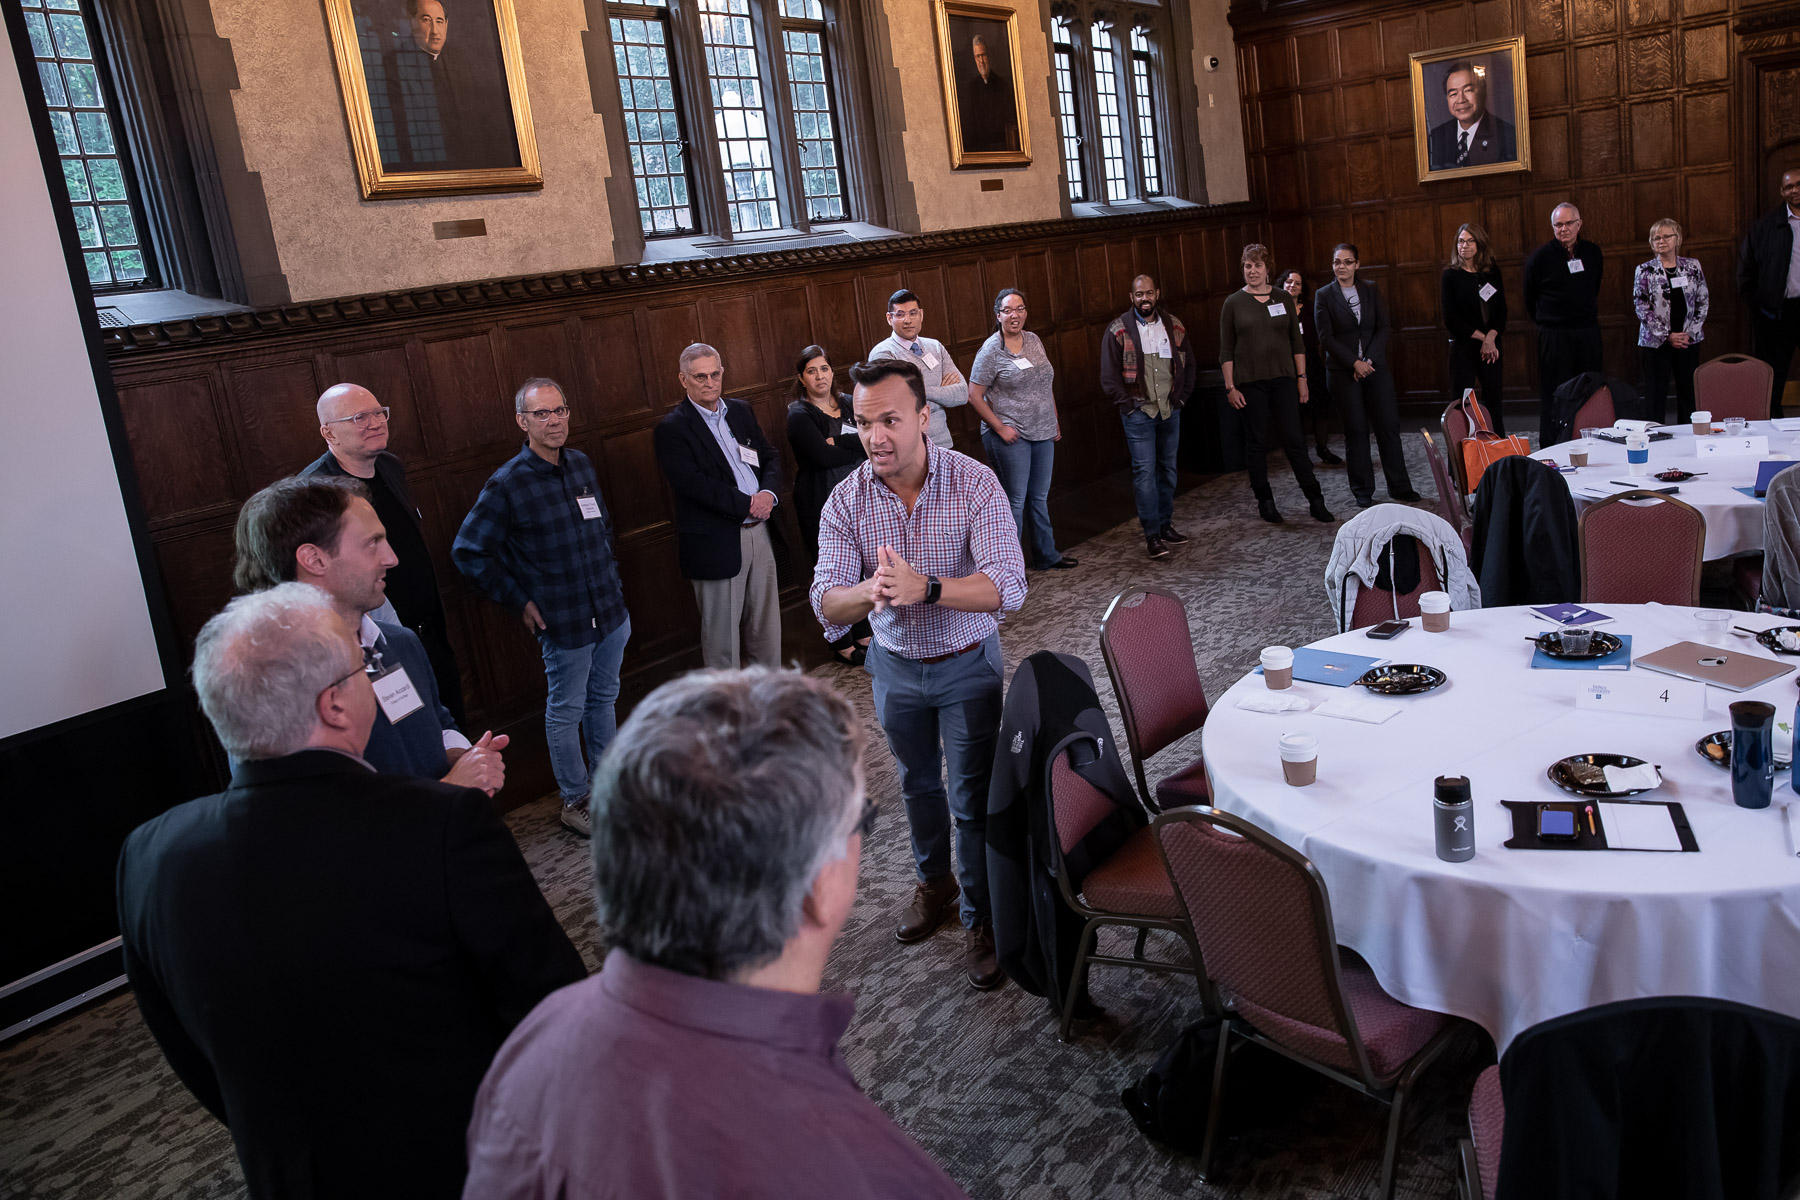 James Mourey, assistant professor of Marketing, demonstrates the game “Pass the Clap” from his keynote presentation and activity “Live from Chicago." (DePaul University/Jeff Carrion)